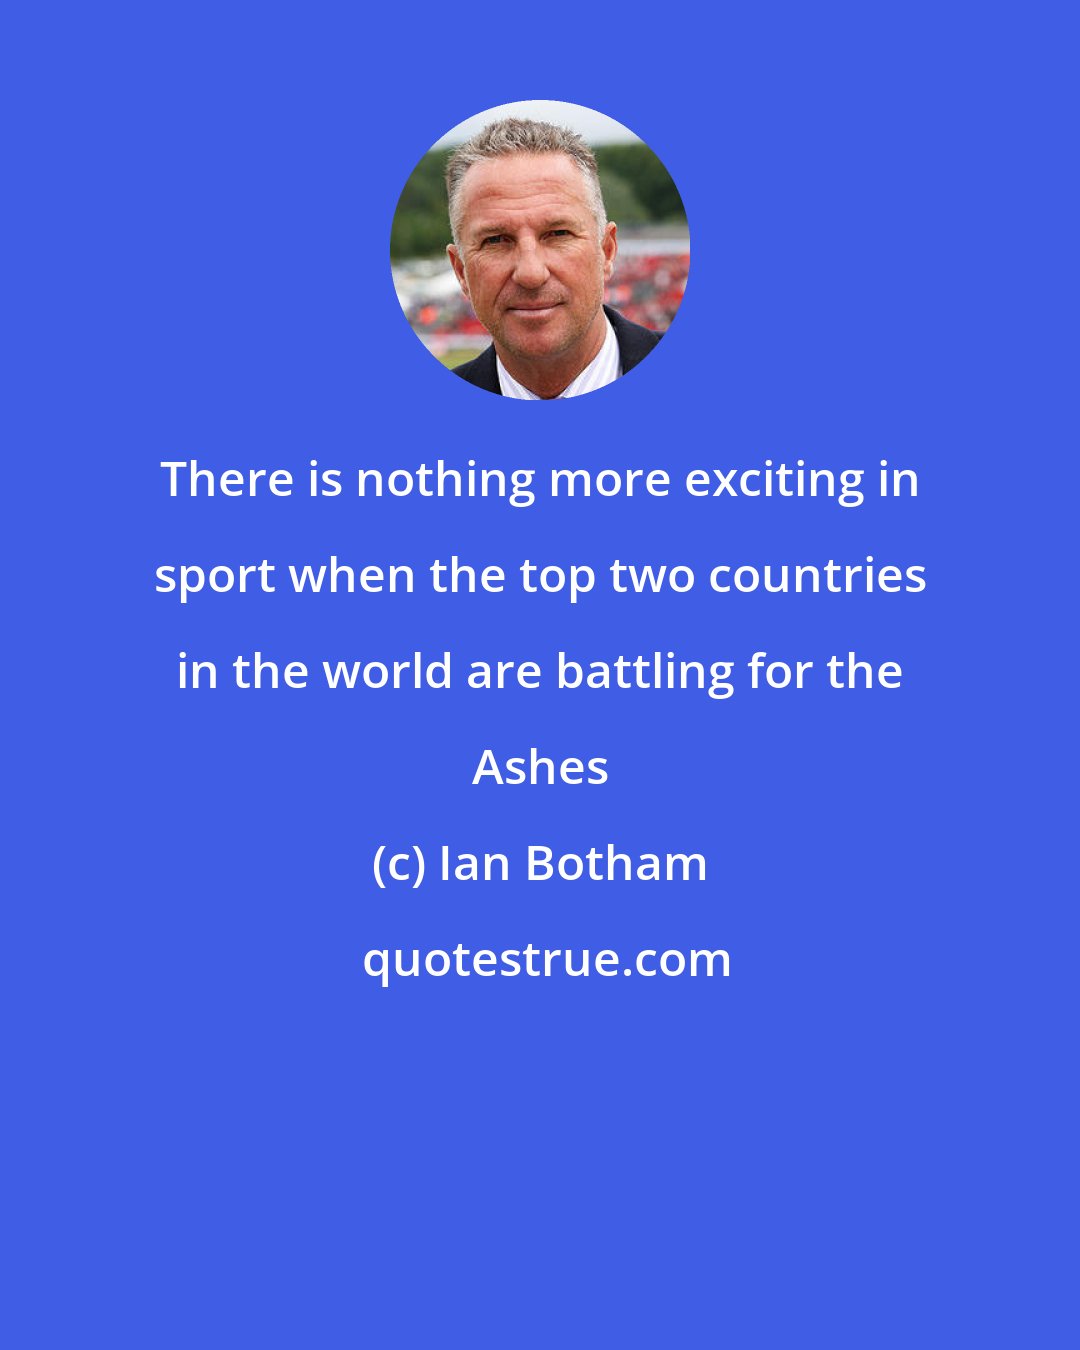 Ian Botham: There is nothing more exciting in sport when the top two countries in the world are battling for the Ashes